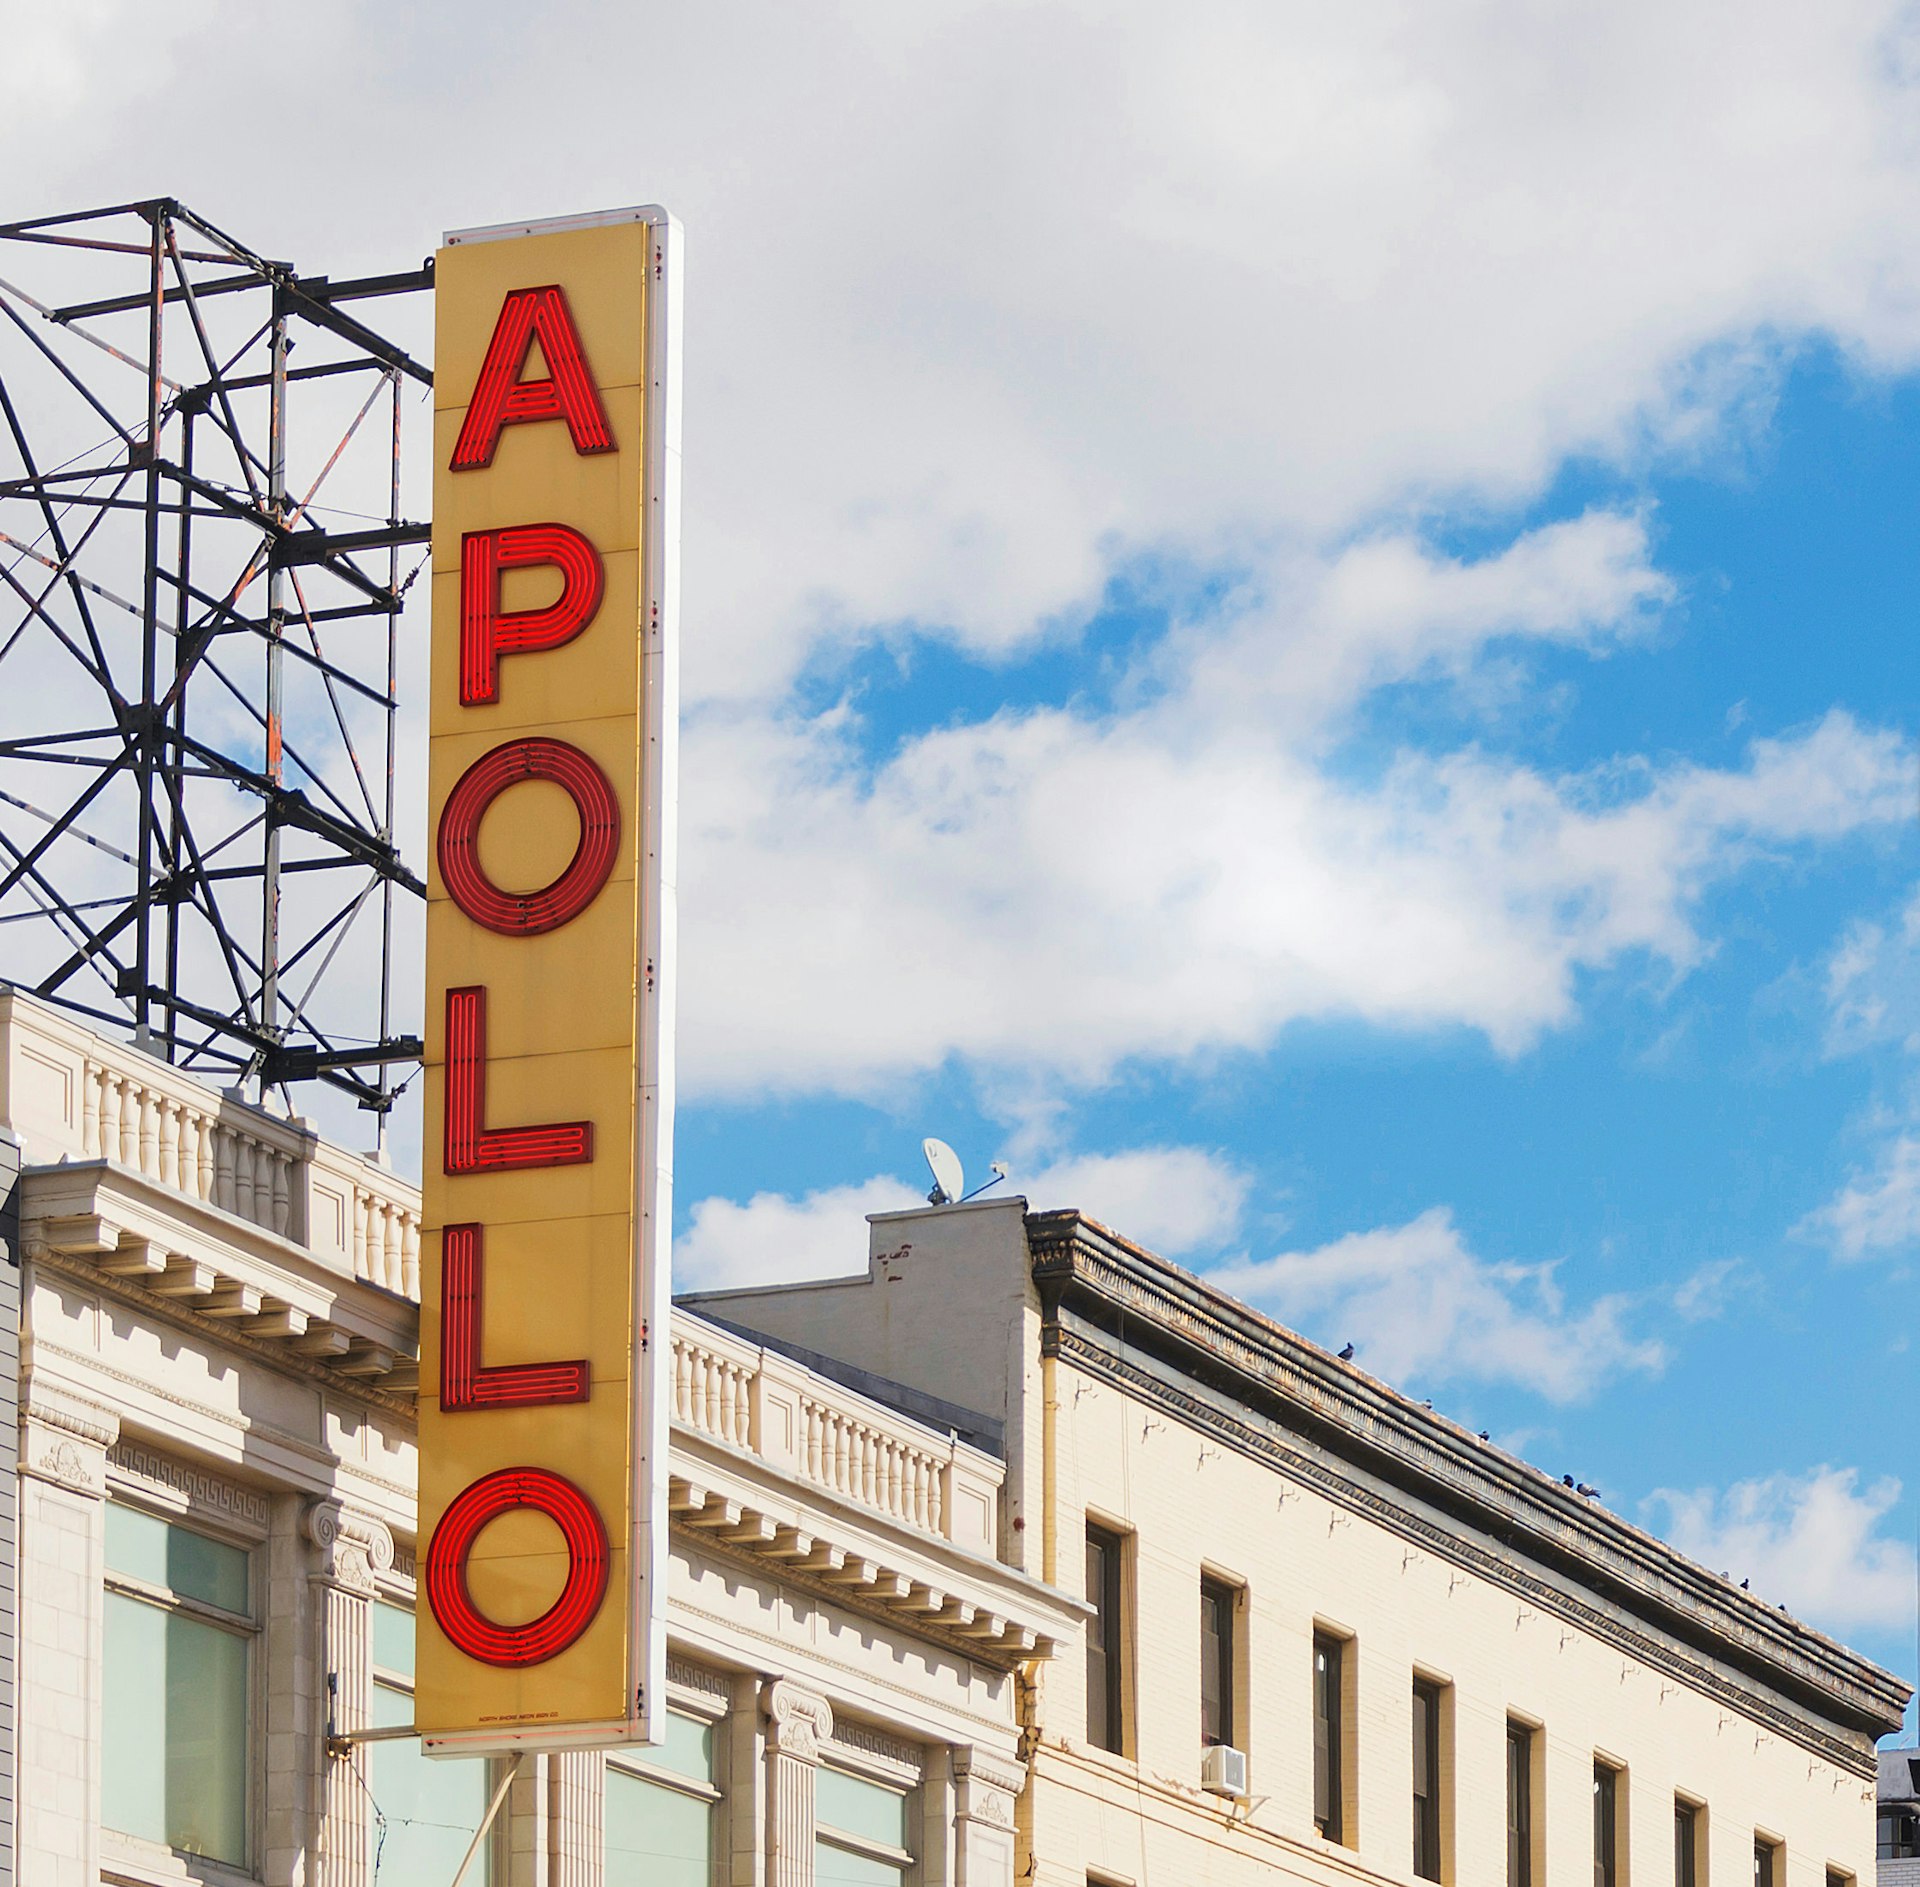 The famous Apollo Theater vertical sign in Harlem